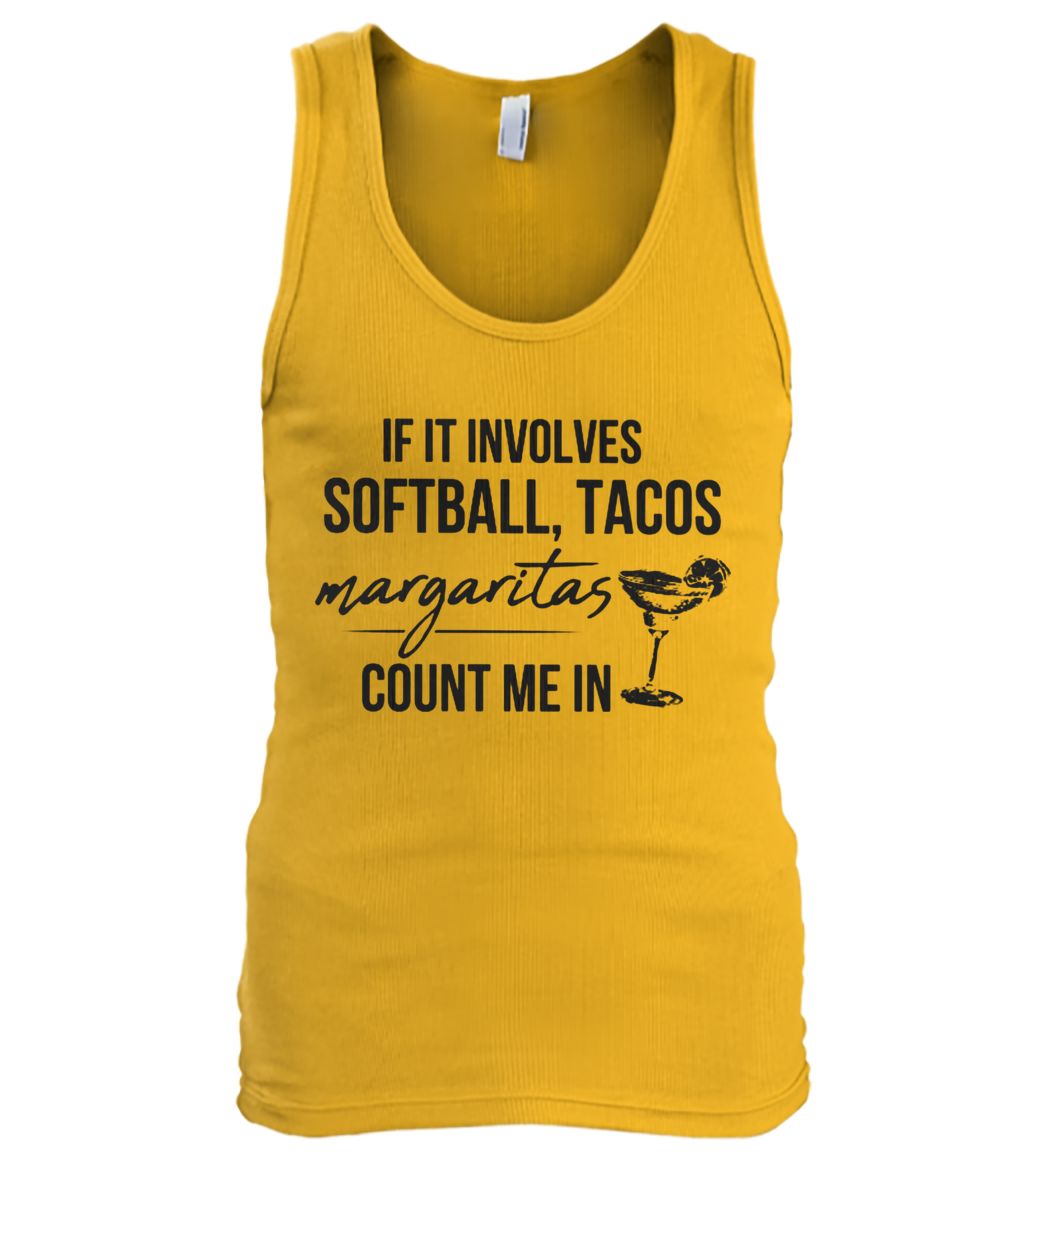 If it involves softball and tacos margaritas count me in tank top